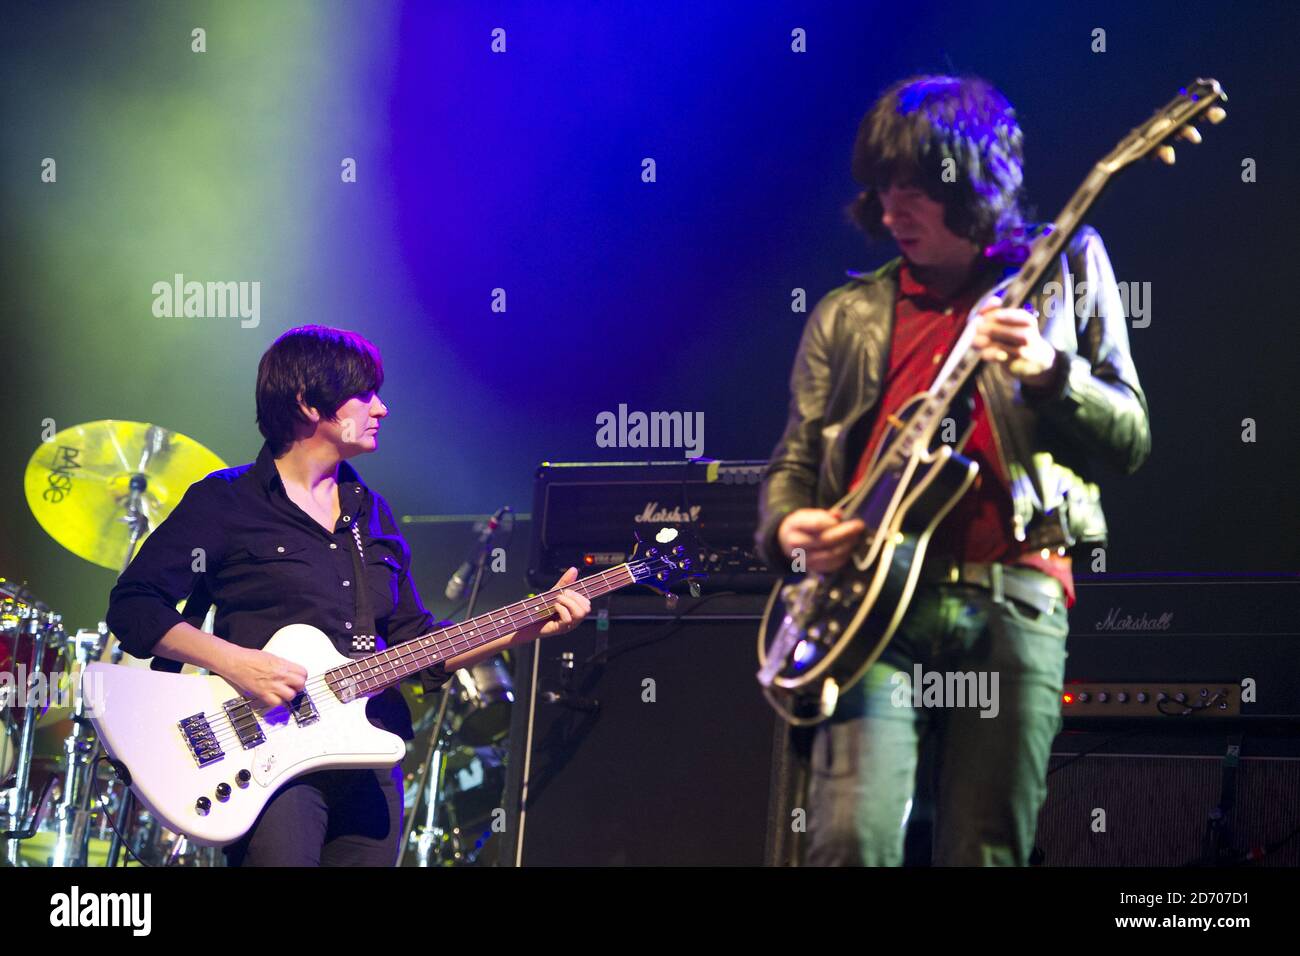 New bass player Debbie Googe and guitarist Andrew Innes performing with Primal Scream, on the eve of the Isle of Wight festival, at Seaclose Park. Stock Photo